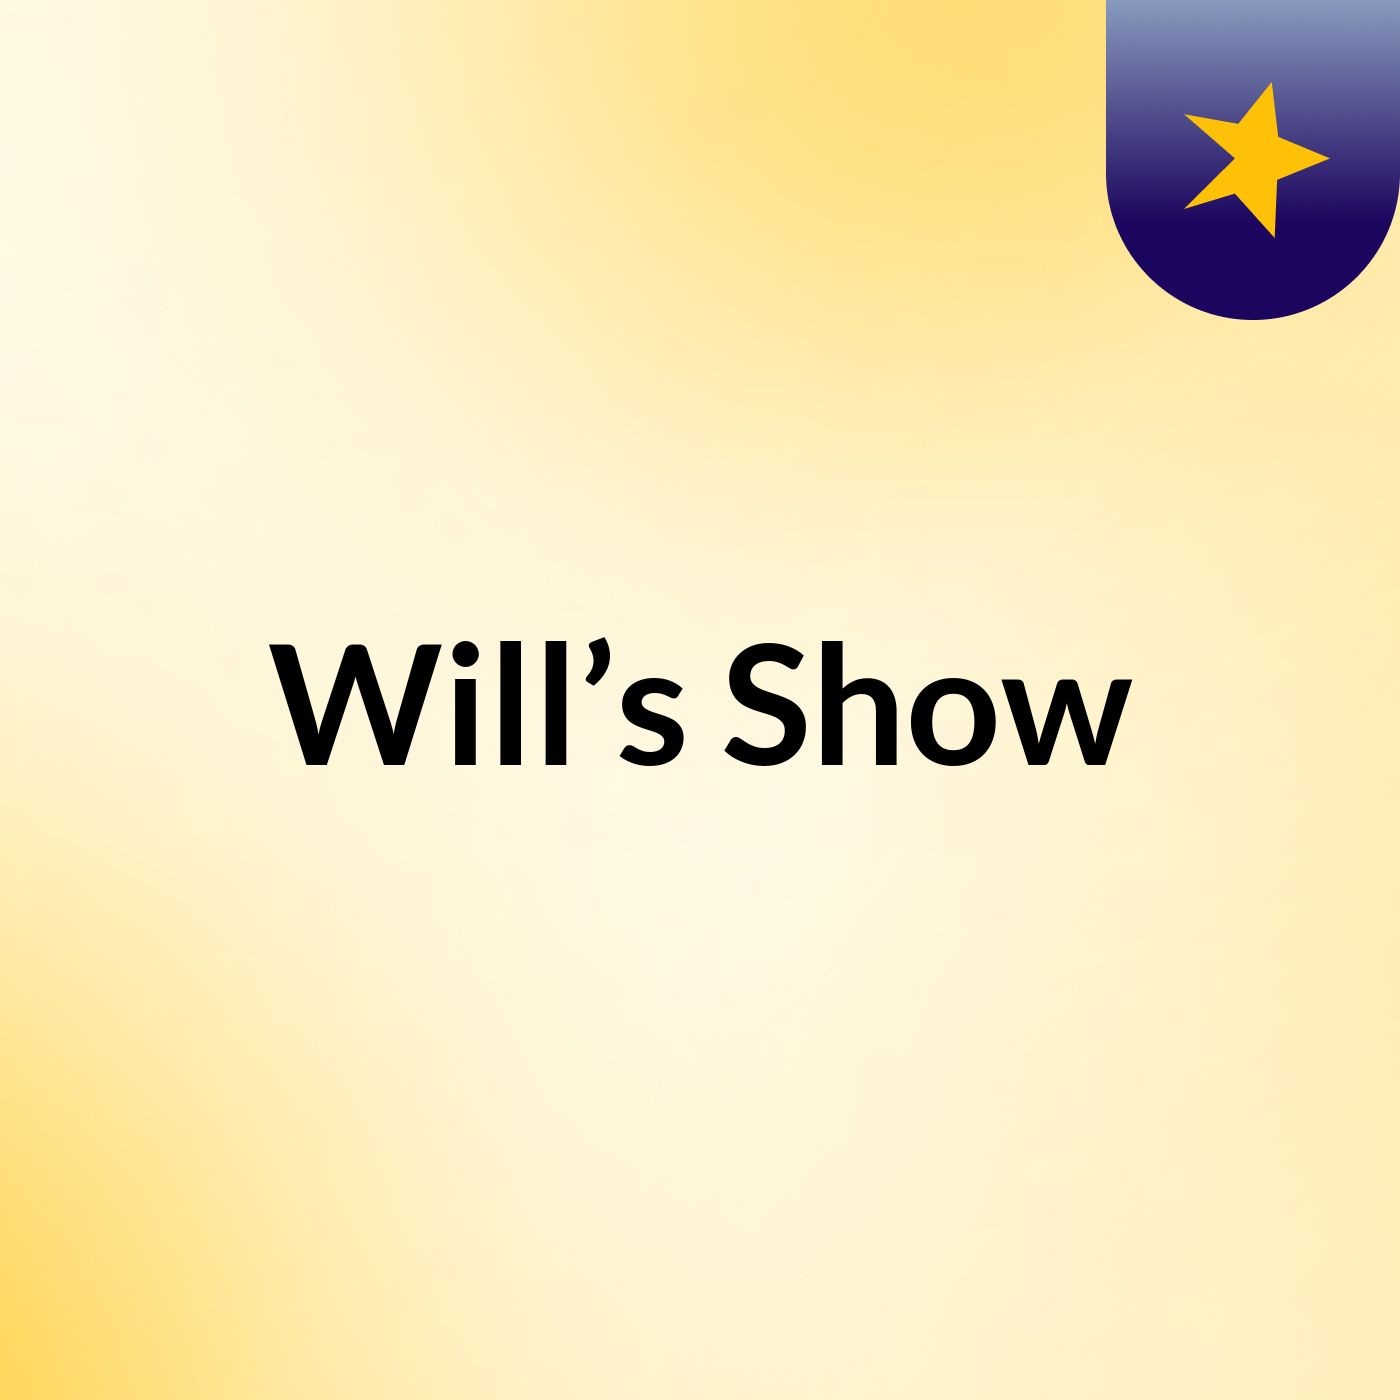 Will’s Show